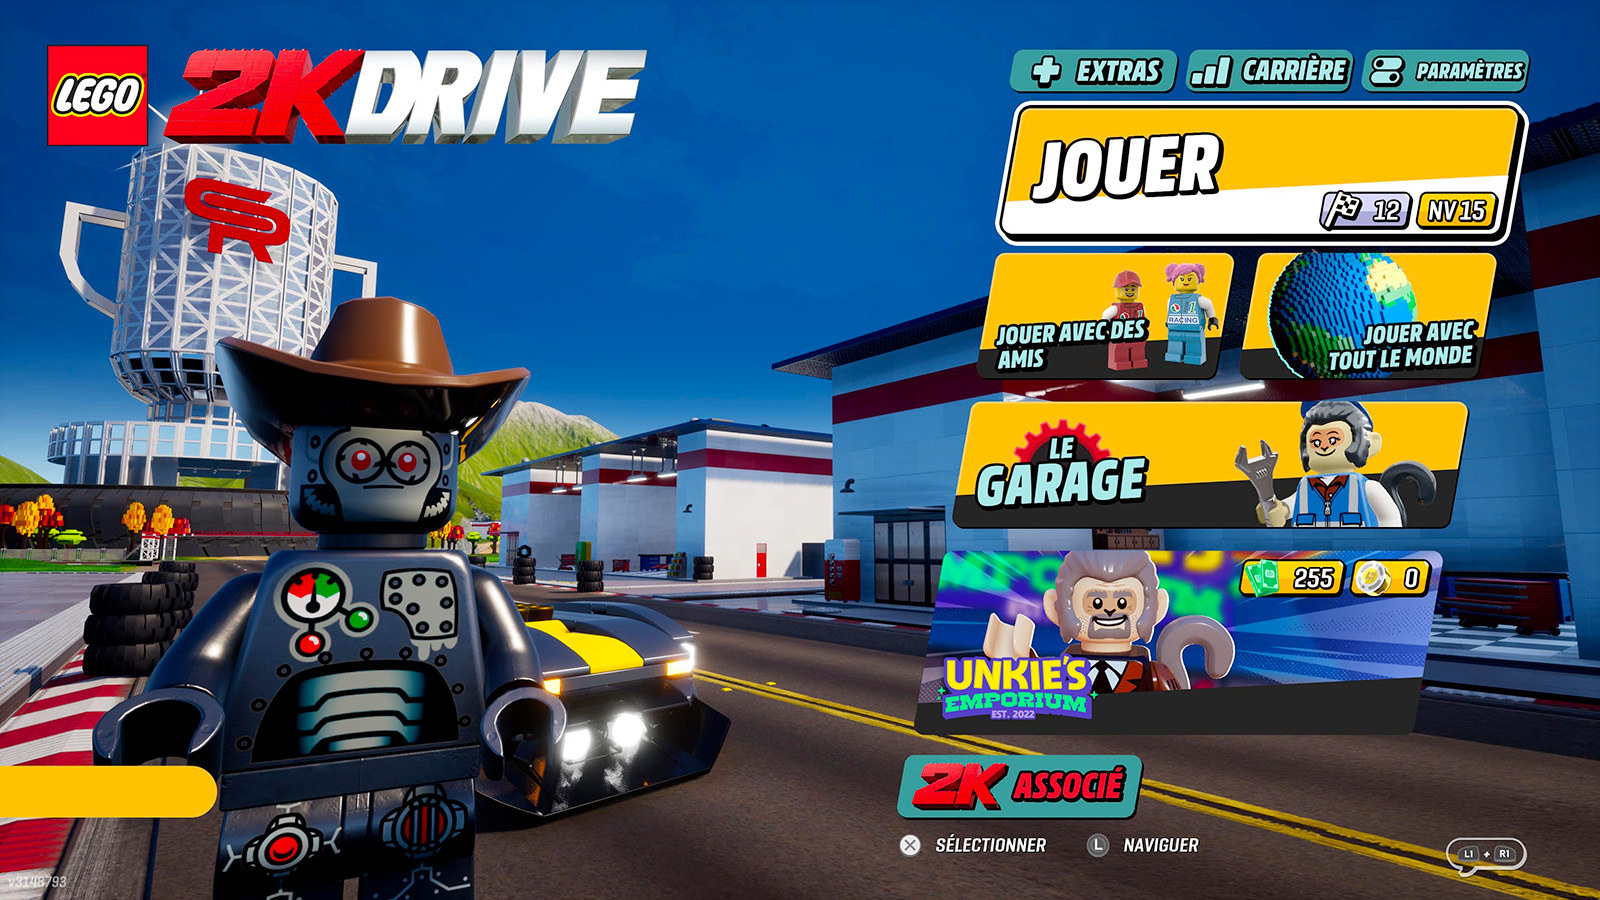 ▻ LEGO 2K the Drive: - BRICKS it\'s not the HOTH still fun year, game but of